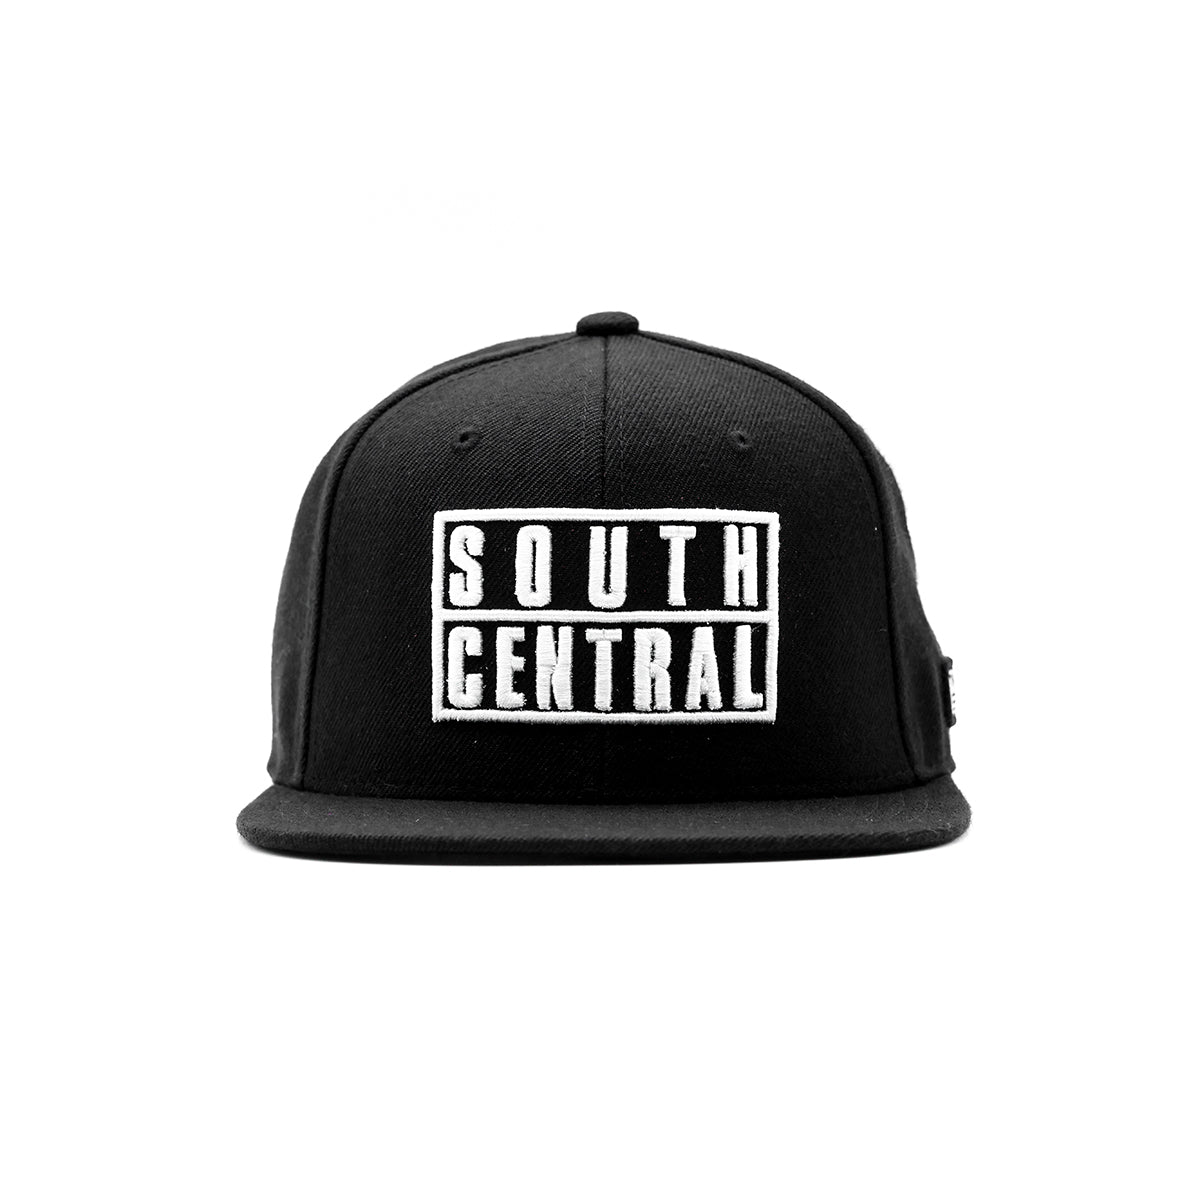 South Central Limited Edition Snapback - Black - Front